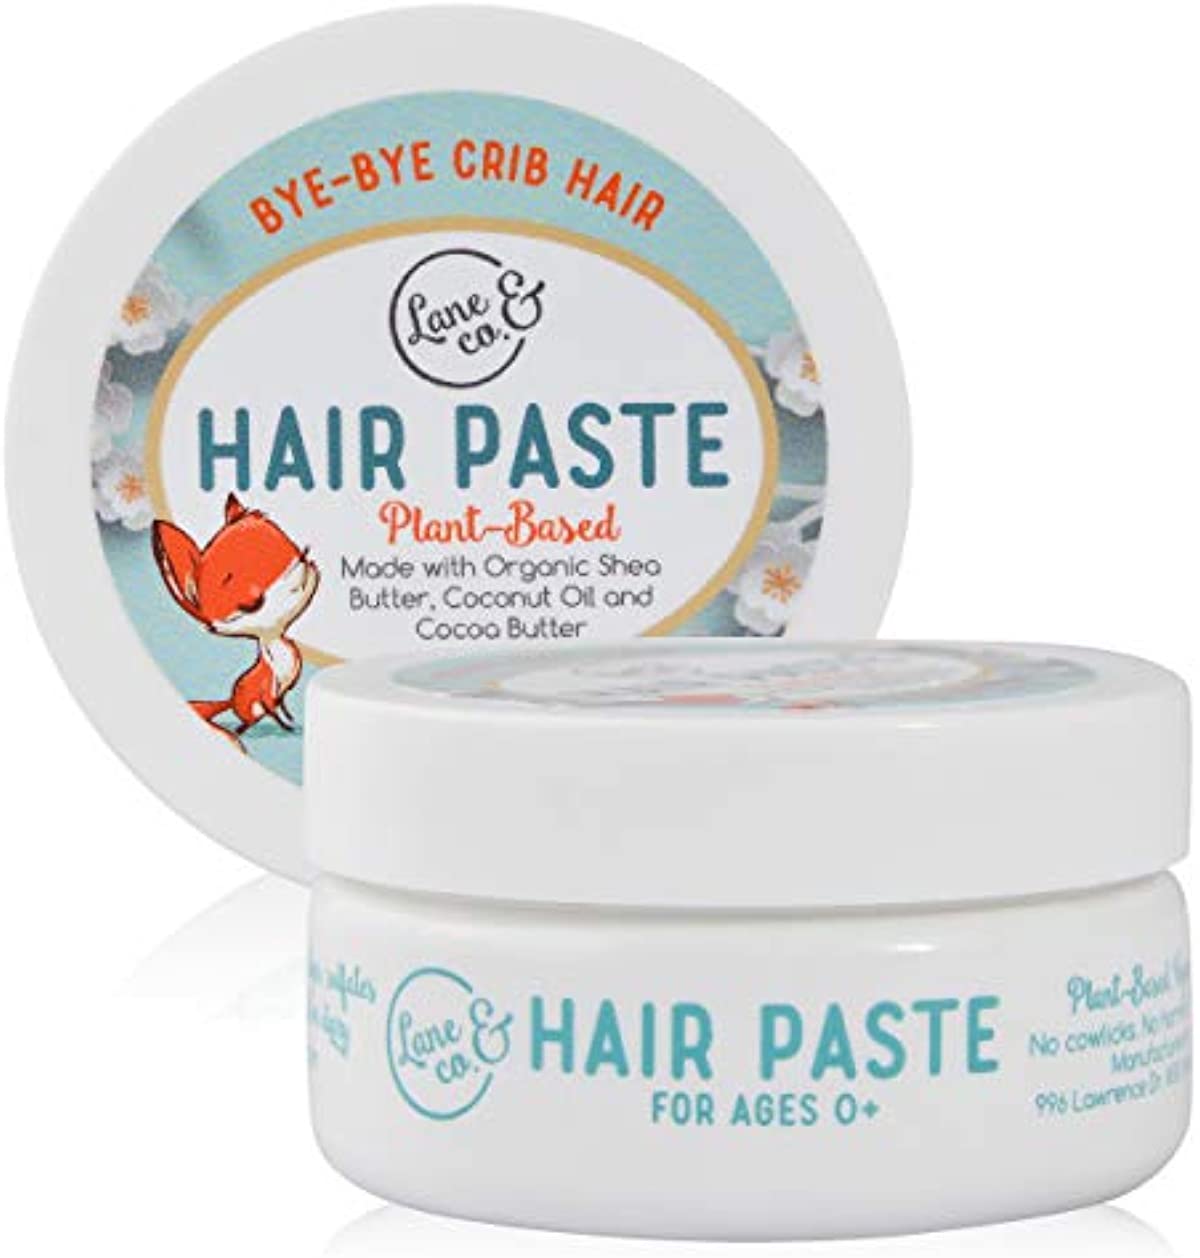 LANE & CO. Hair Paste - Plant-Based Styling Gel for Babies, Toddlers, Kids - Natural & Organic Formula, Safe & Non-Sticky, Tame Bed Head & Flyaway Hair, 2oz